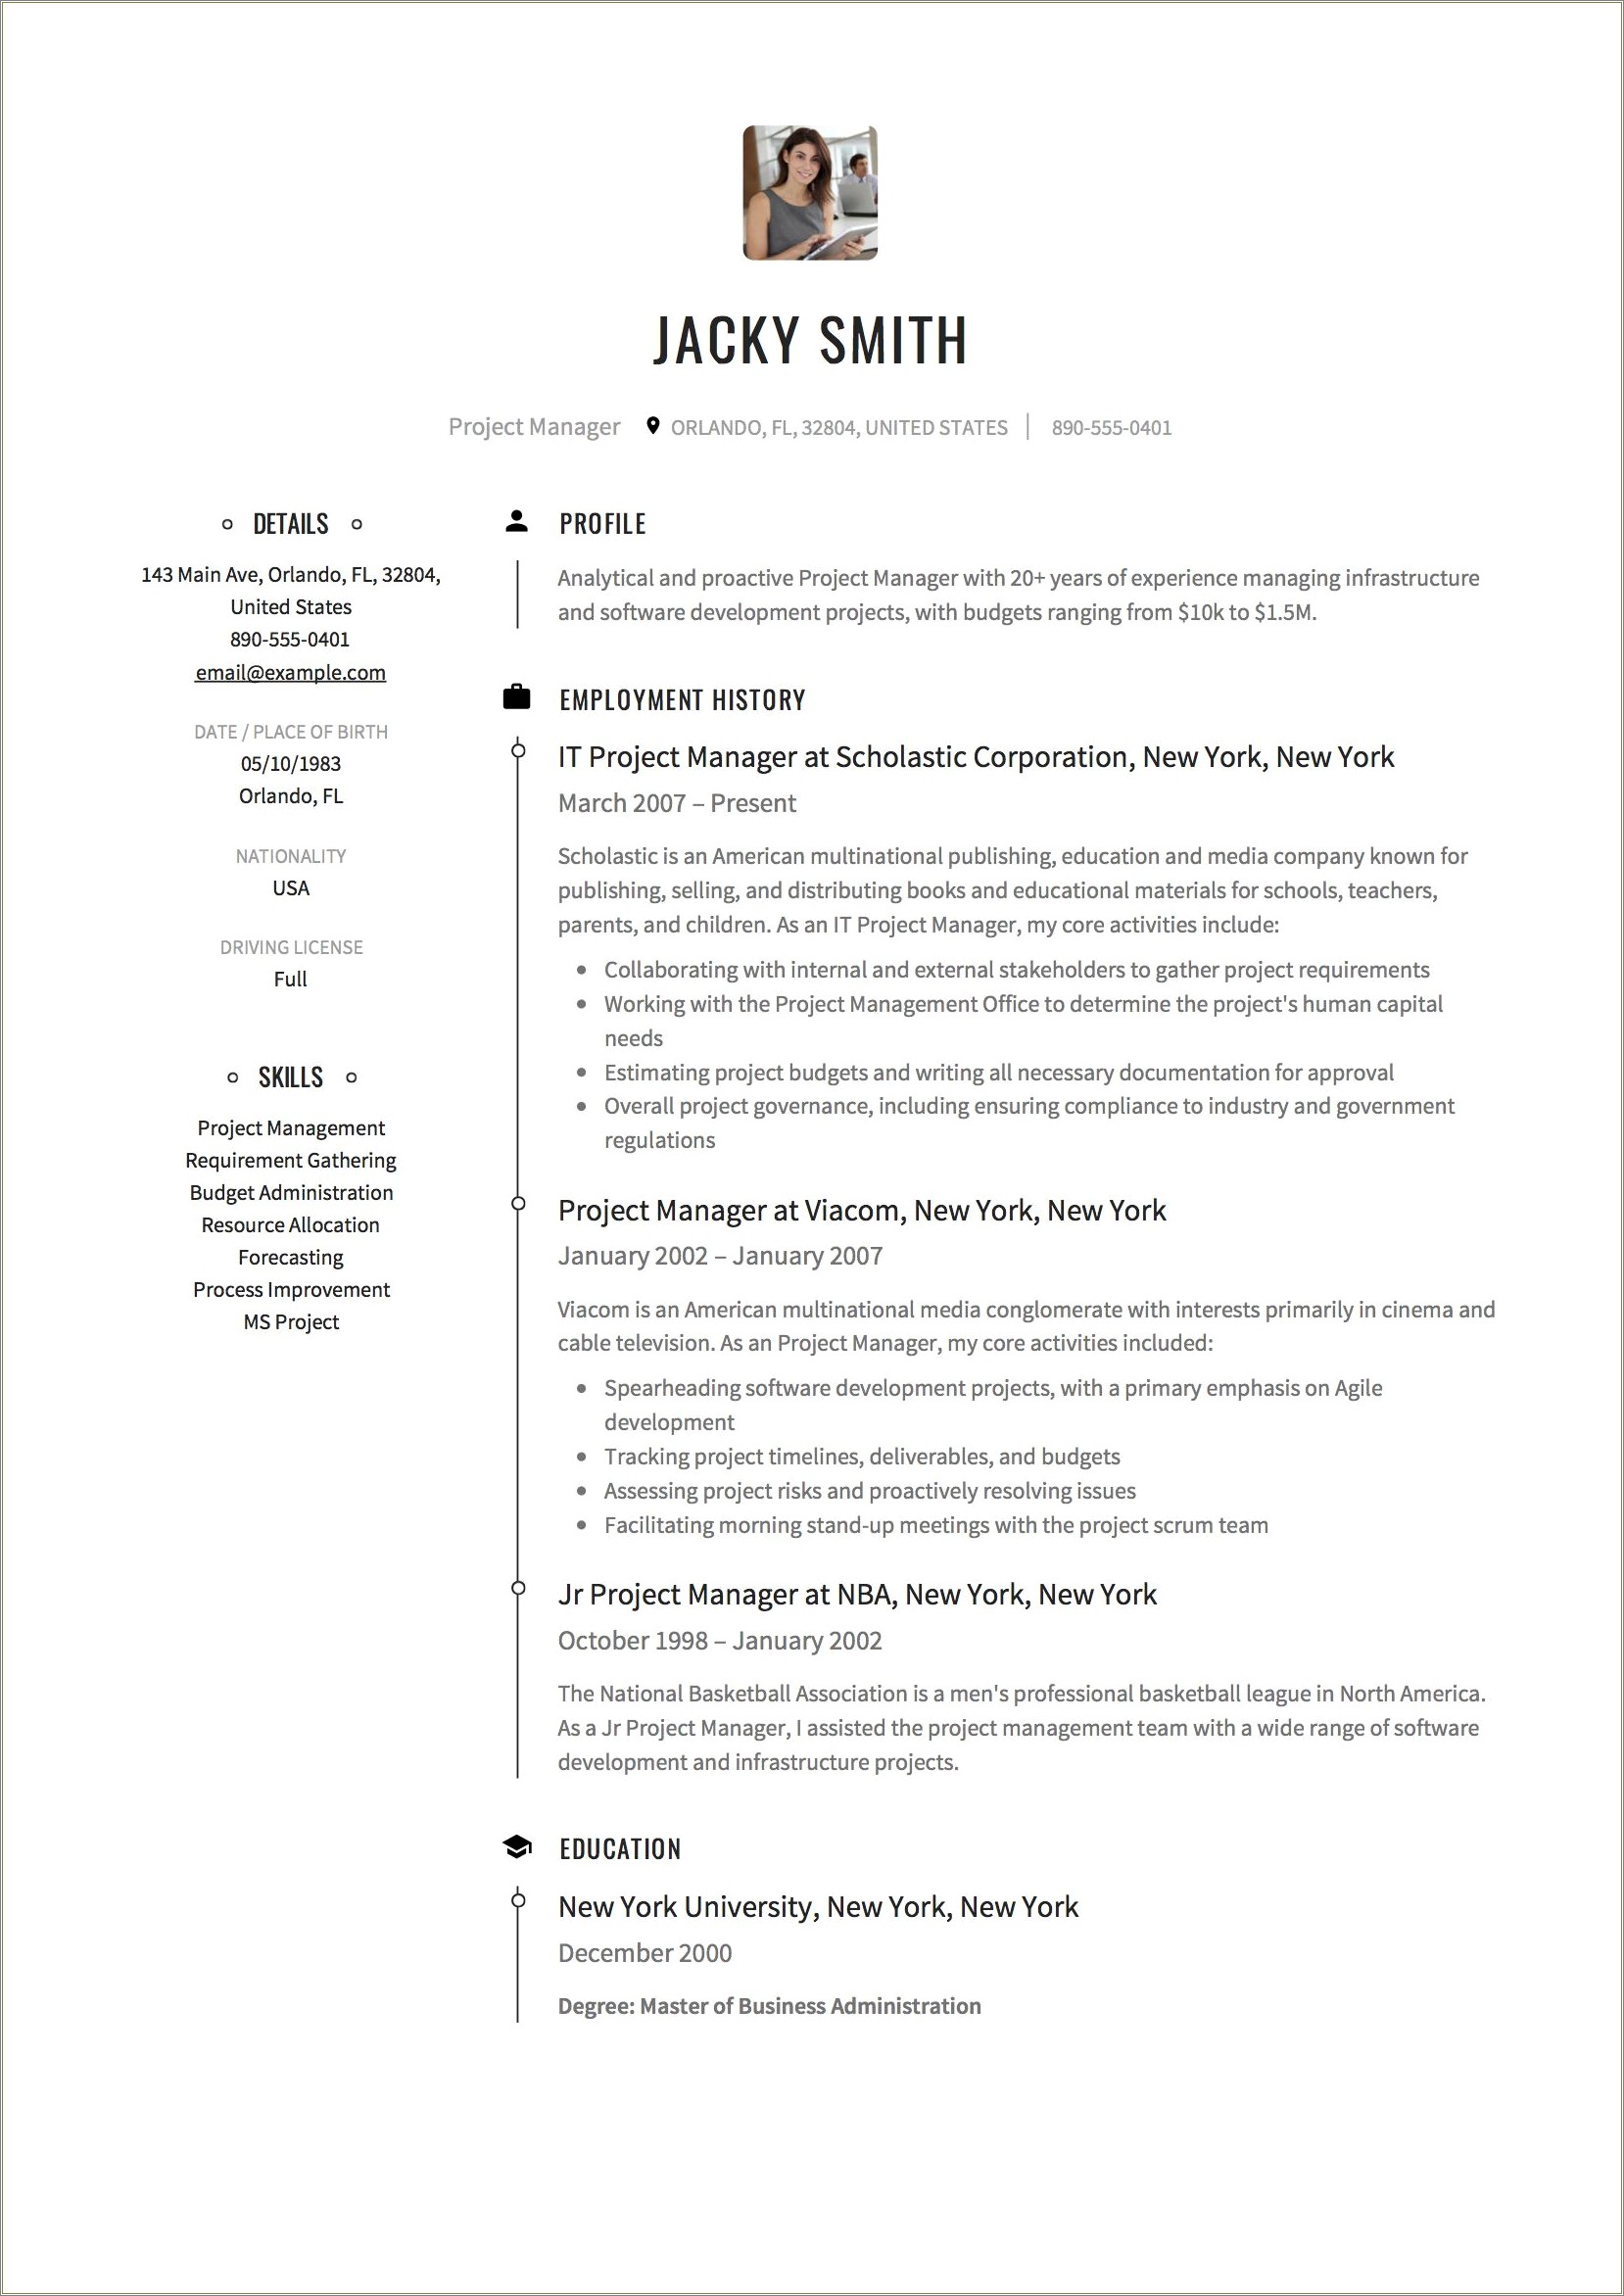 It Project Manager Office 365 Implementation Resume